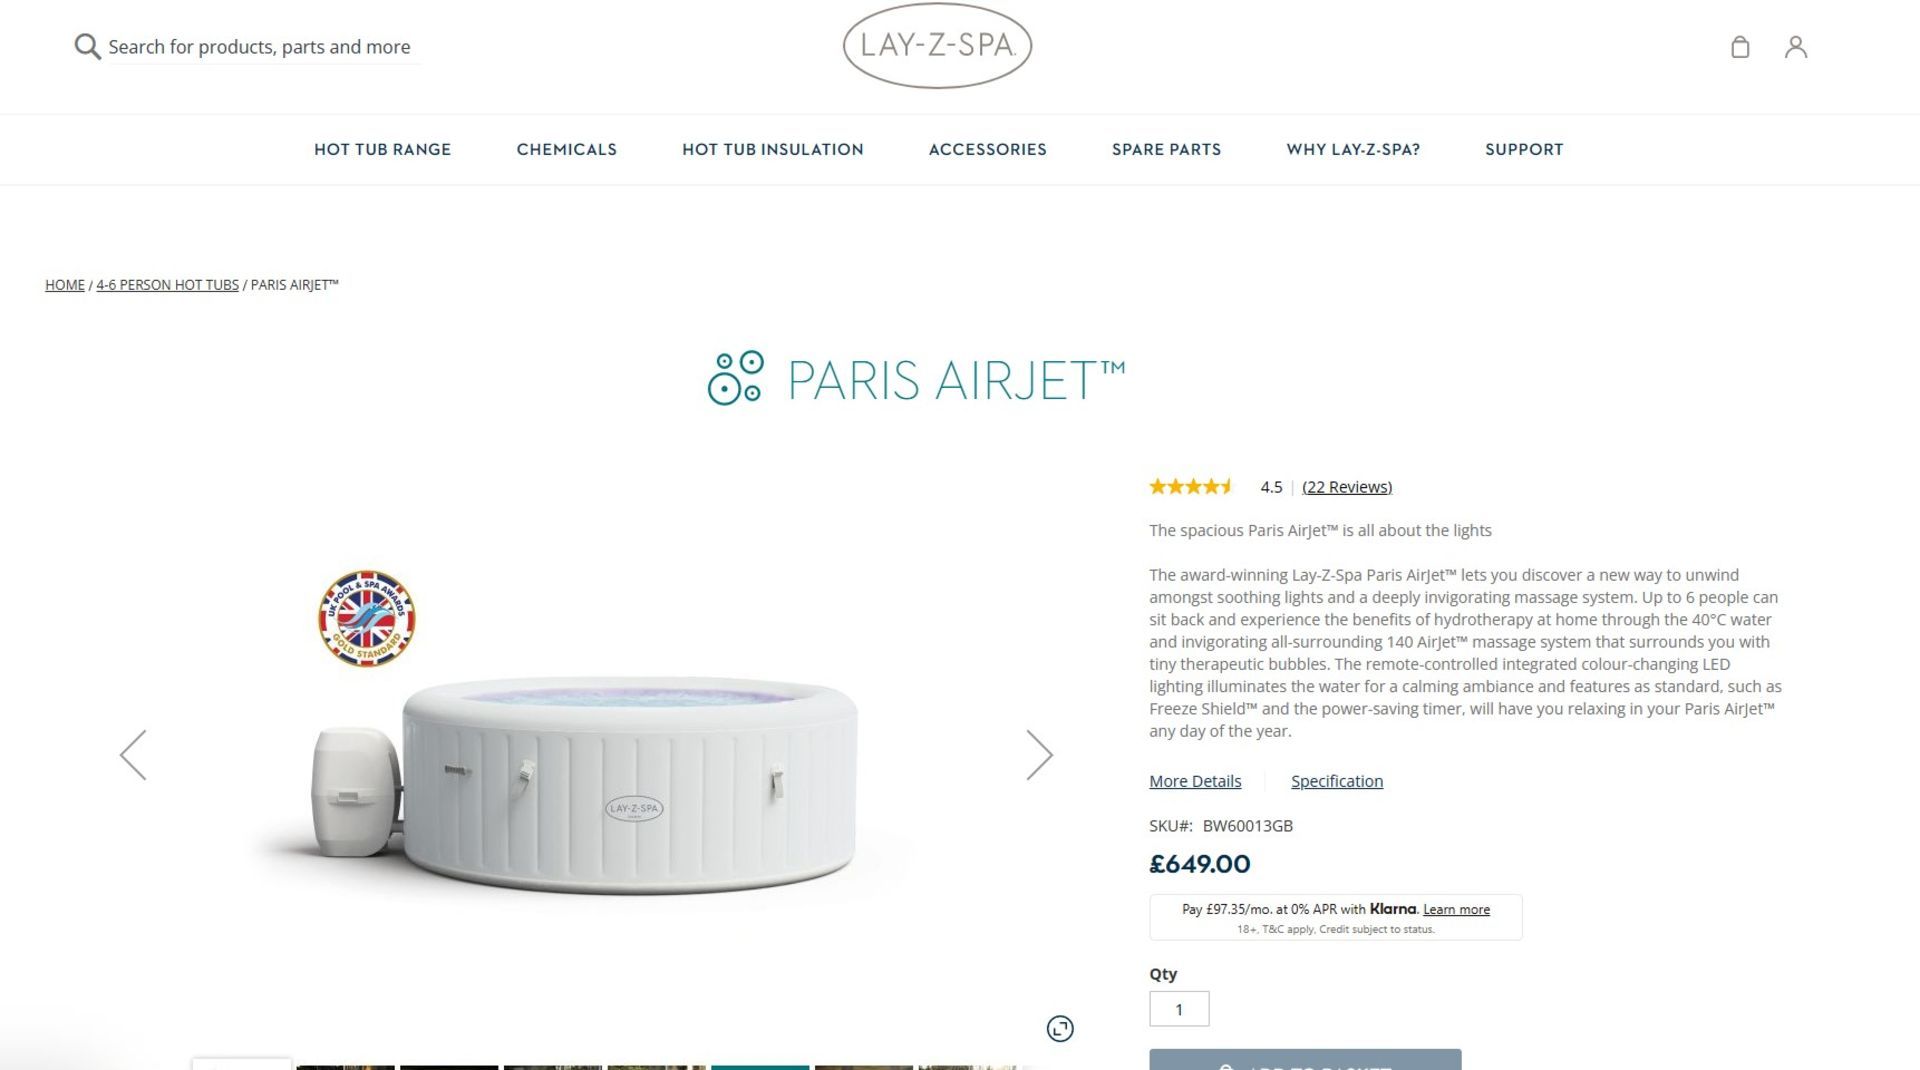 NEW & Boxed LAY-Z-SPA 6 Person PARIS AIRJET. The spacious Paris AirJet™ is all about the lights. The